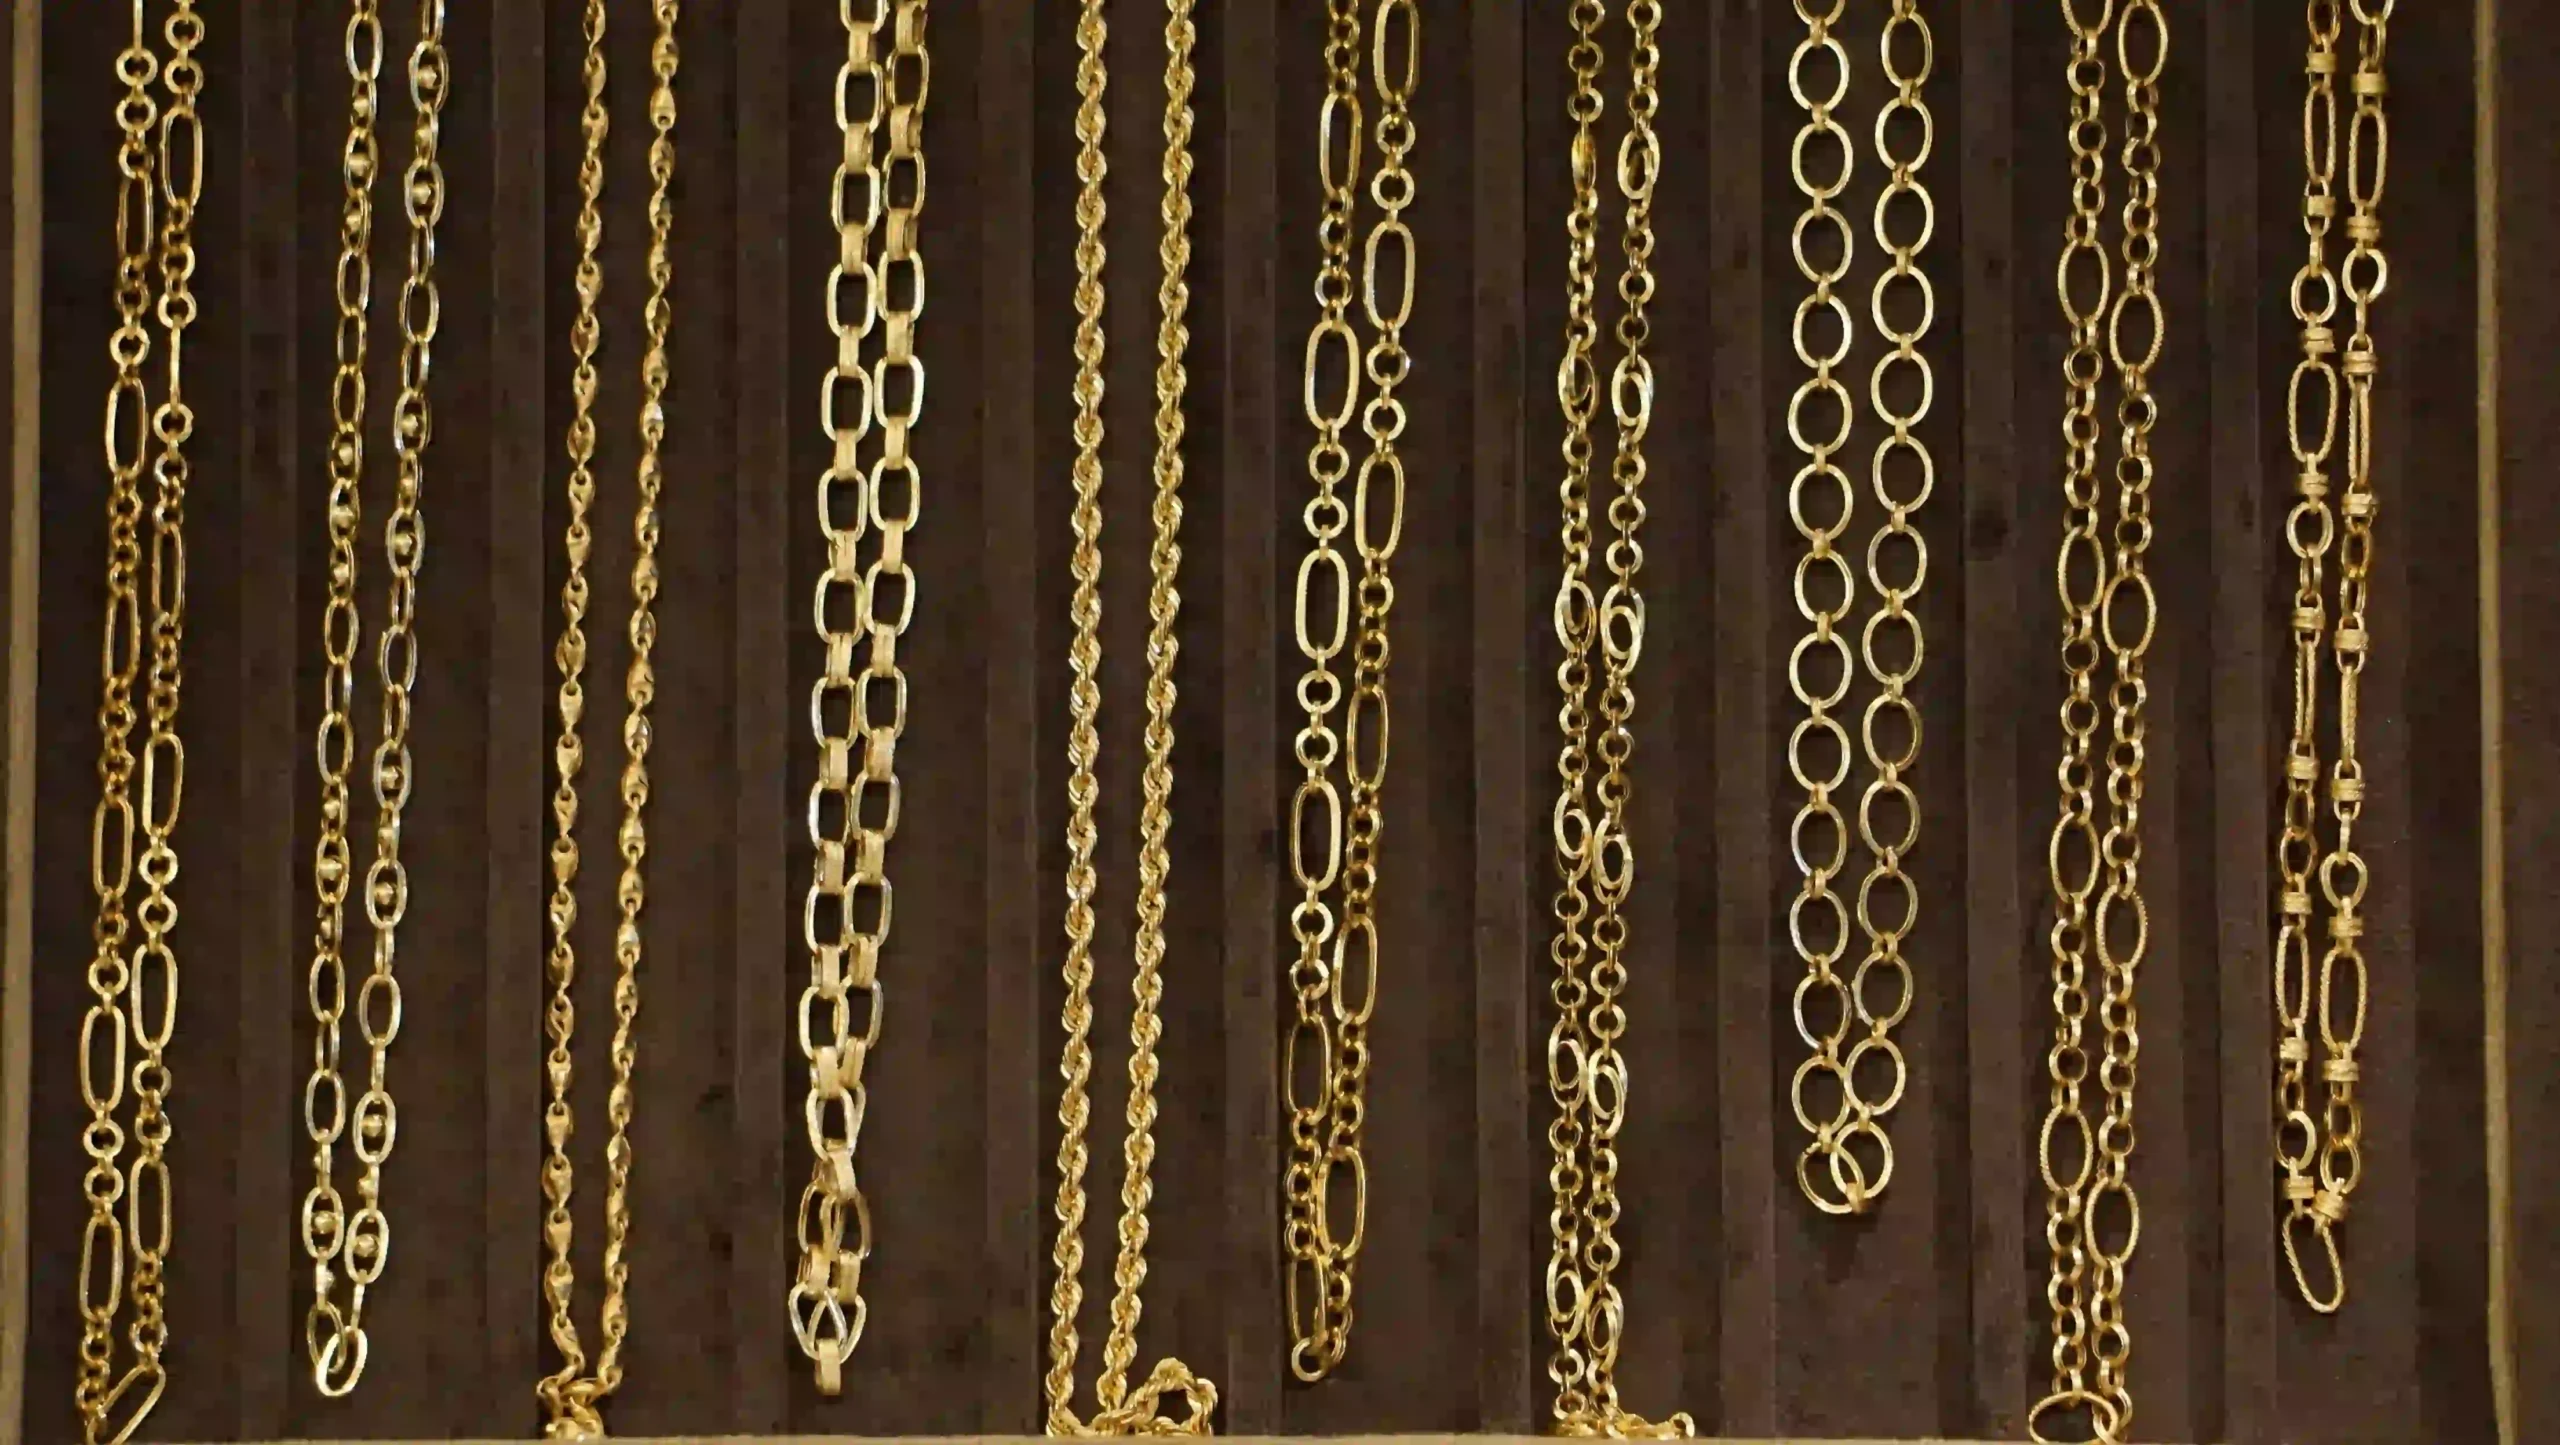 Finding the matching chain with a pendant is an important aspect in the process of pendant accessories as a chain can turn out to be the difference maker. Whether you're styling your necklace for a walk on the red carpet or just adding a dot of your elegance to your daily wear, the chain of choice is what can bring your pendant to life. But because there are countless choices to choose from, be it simple and delicate chains to vibrant and bold statement pieces, how should you find a pendant that is the best for you? Besides you, we are here for you. Through this guide, we will touch on the different things you should take into account when searching for a chain to accompany your pendant and will learn how to make it look great. How to Choose the Best Chain for a Pendant Material Matters  One of the first things to consider when choosing a chain for your pendant is the material. Different materials offer different looks and levels of durability. Common options include: Sterling Silver: Offers a classic and timeless look, ideal for both casual and formal wear. It's durable and tends to complement various pendant styles. Gold (Yellow, White, or Rose): Adds a touch of luxury and sophistication. Gold chains come in different karats, each offering varying levels of purity and durability. Stainless Steel: Known for its strength and resistance to tarnishing, stainless steel chains are a popular choice for those seeking durability without sacrificing style. 14K or 18K Gold-Filled: Offers the look of solid gold at a more affordable price point. Gold-filled chains consist of a thick layer of gold bonded to a base metal, providing durability and longevity. This will help to create a necklace that will look expensive and luxurious. Chain Style  The style of the chain can also greatly impact the overall look of your pendant. If you have a delicate or intricately designed pendant, a fine chain with smaller links can help to highlight its beauty without overpowering it. On the other hand, if you have a larger or more statement-worthy pendant, a thicker chain with bold links can provide the perfect balance and make a strong visual impact. Common chain styles include: Cable Chain: Features uniform, oval-shaped links, offering simplicity and versatility. It's suitable for various pendant shapes and sizes. Rolo Chain: This consists of round links connected in a simple, uniform pattern, providing a classic and understated look. Box Chain: Characterized by square links that form a smooth, sleek chain. Perfect for pendant designs with a contemporary or minimalist aesthetic. Snake Chain: Comprises tightly woven links that create a smooth, flexible chain resembling a snake's skin. It's perfect for showcasing delicate or intricate pendants. Length Matters  Another critical aspect to take into account is the chain's length. The right length will not only complement the style of your pendant but also flatter your neckline. Common chain lengths include: Choker: Fits closely around the neck, usually spanning 14 to 16 inches in length. Ideal for showcasing smaller pendants or creating a trendy, layered look. Princess Length: Falls just below the collarbone, around 16 to 18 inches long. A versatile option is suitable for most necklines and pendant sizes. Matinee Length: Extends to the top of the bust, approximately 20 to 24 inches long. Ideal for larger pendants or for creating a statement look. Opera Length: Reaches below the bust or to the sternum, typically 28 to 36 inches long. Perfect for dramatic pendant displays or elegant evening wear. Consider Your Lifestyle The type of chain you select for your pendant should take into account the activities you do daily and the way you intend to wear it. If you are constantly on the move or working with your hands, you may need a chain that can endure daily tear and wear and can resist damage to bear the daily wear and tear. On the other hand, if you're going to wear your pendant for a wedding ceremony or evening engagement, then you may pick a more tender chain that adds an element of gentility to your style. Personal Preference In the end, the great option for your pendant is the one that compliments you on a personal level. Whether you choose to go with a plain and linear chain or be more flashy with a necklace that makes a real statement, the key is that you sure feel happy and at ease with that piece of jewelry. Also, learn how to layer necklaces(98) in style to make your look even more special. Finally, realizing the most suitable chain for your pendant requires the proper combination of style, material, and personal preference among so many others. So, consider these factors and take the time to explore your choices and you will locate a chain that adds beauty to your pendant but most essentially, gives it a unique touch. So go for it, try out various kinds of styles and lengths, and let your pendants be unique and gorgeous. 